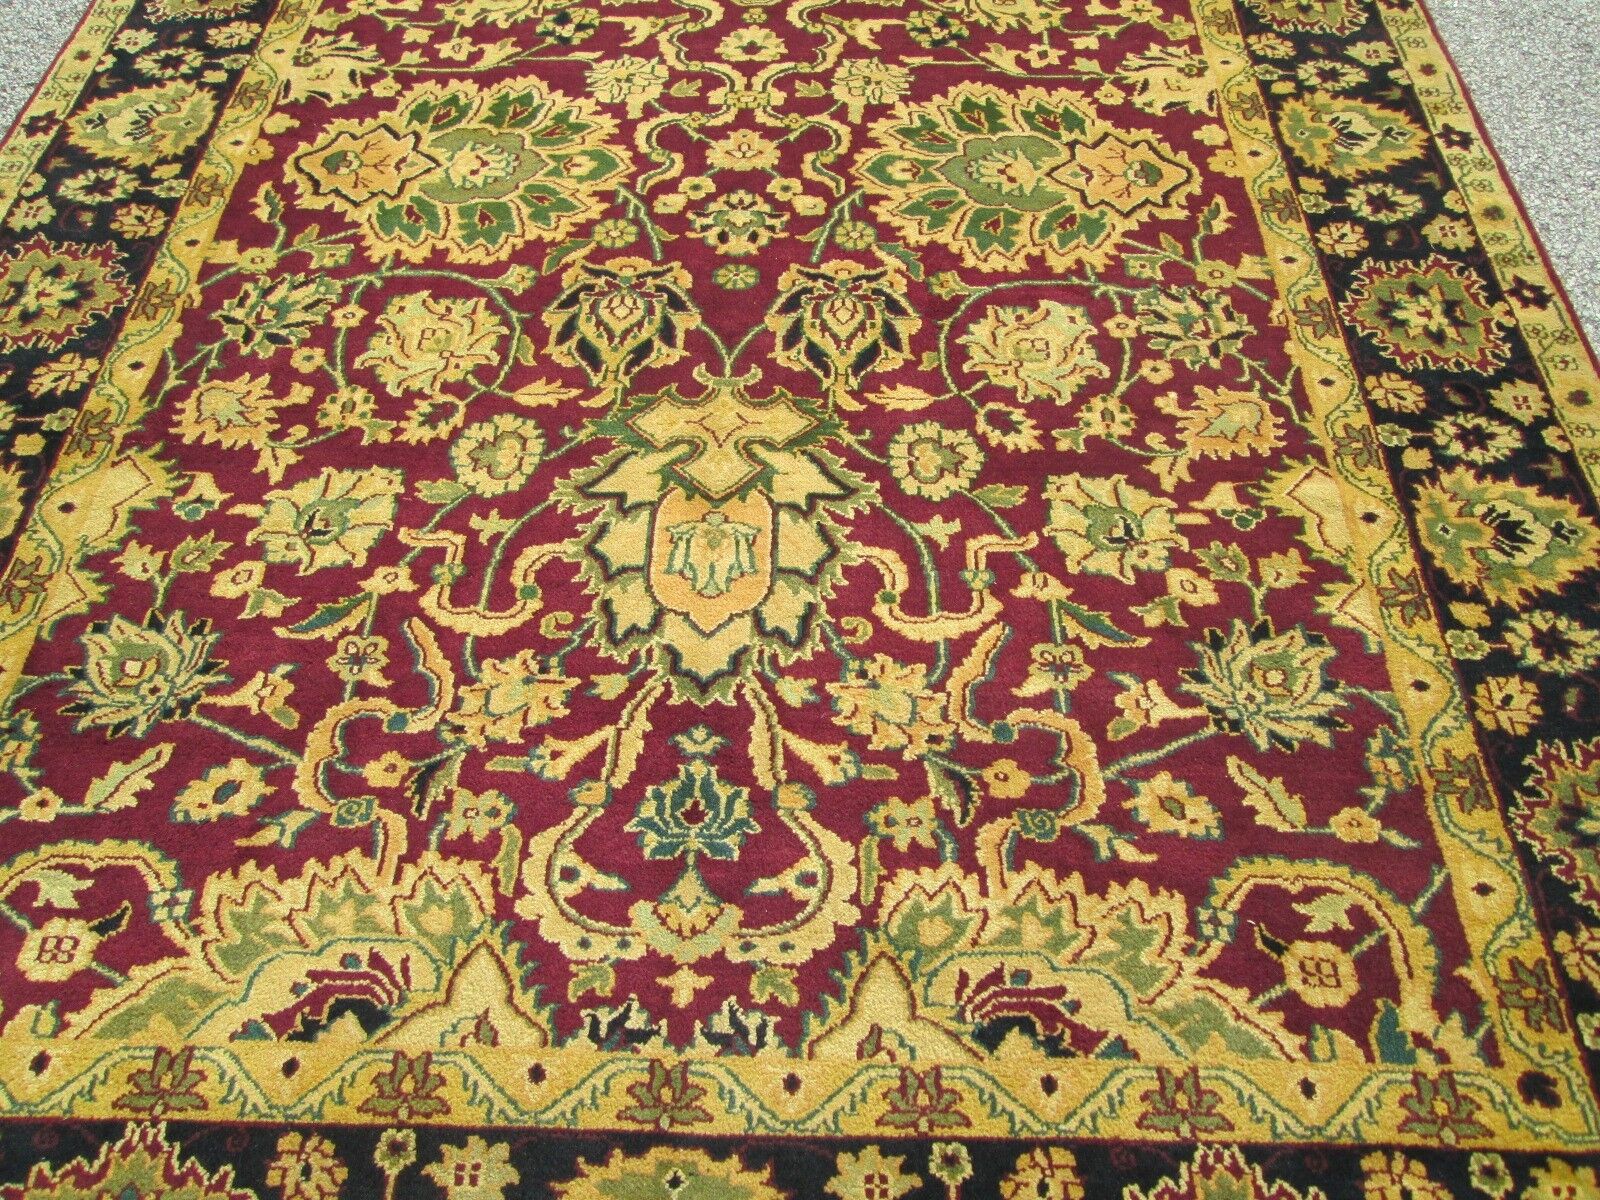 ORIENTAL RUG  AGRA PATTERN A FINE HAND WOVEN 8 x 10 NEVER USED RUG FULL PILE